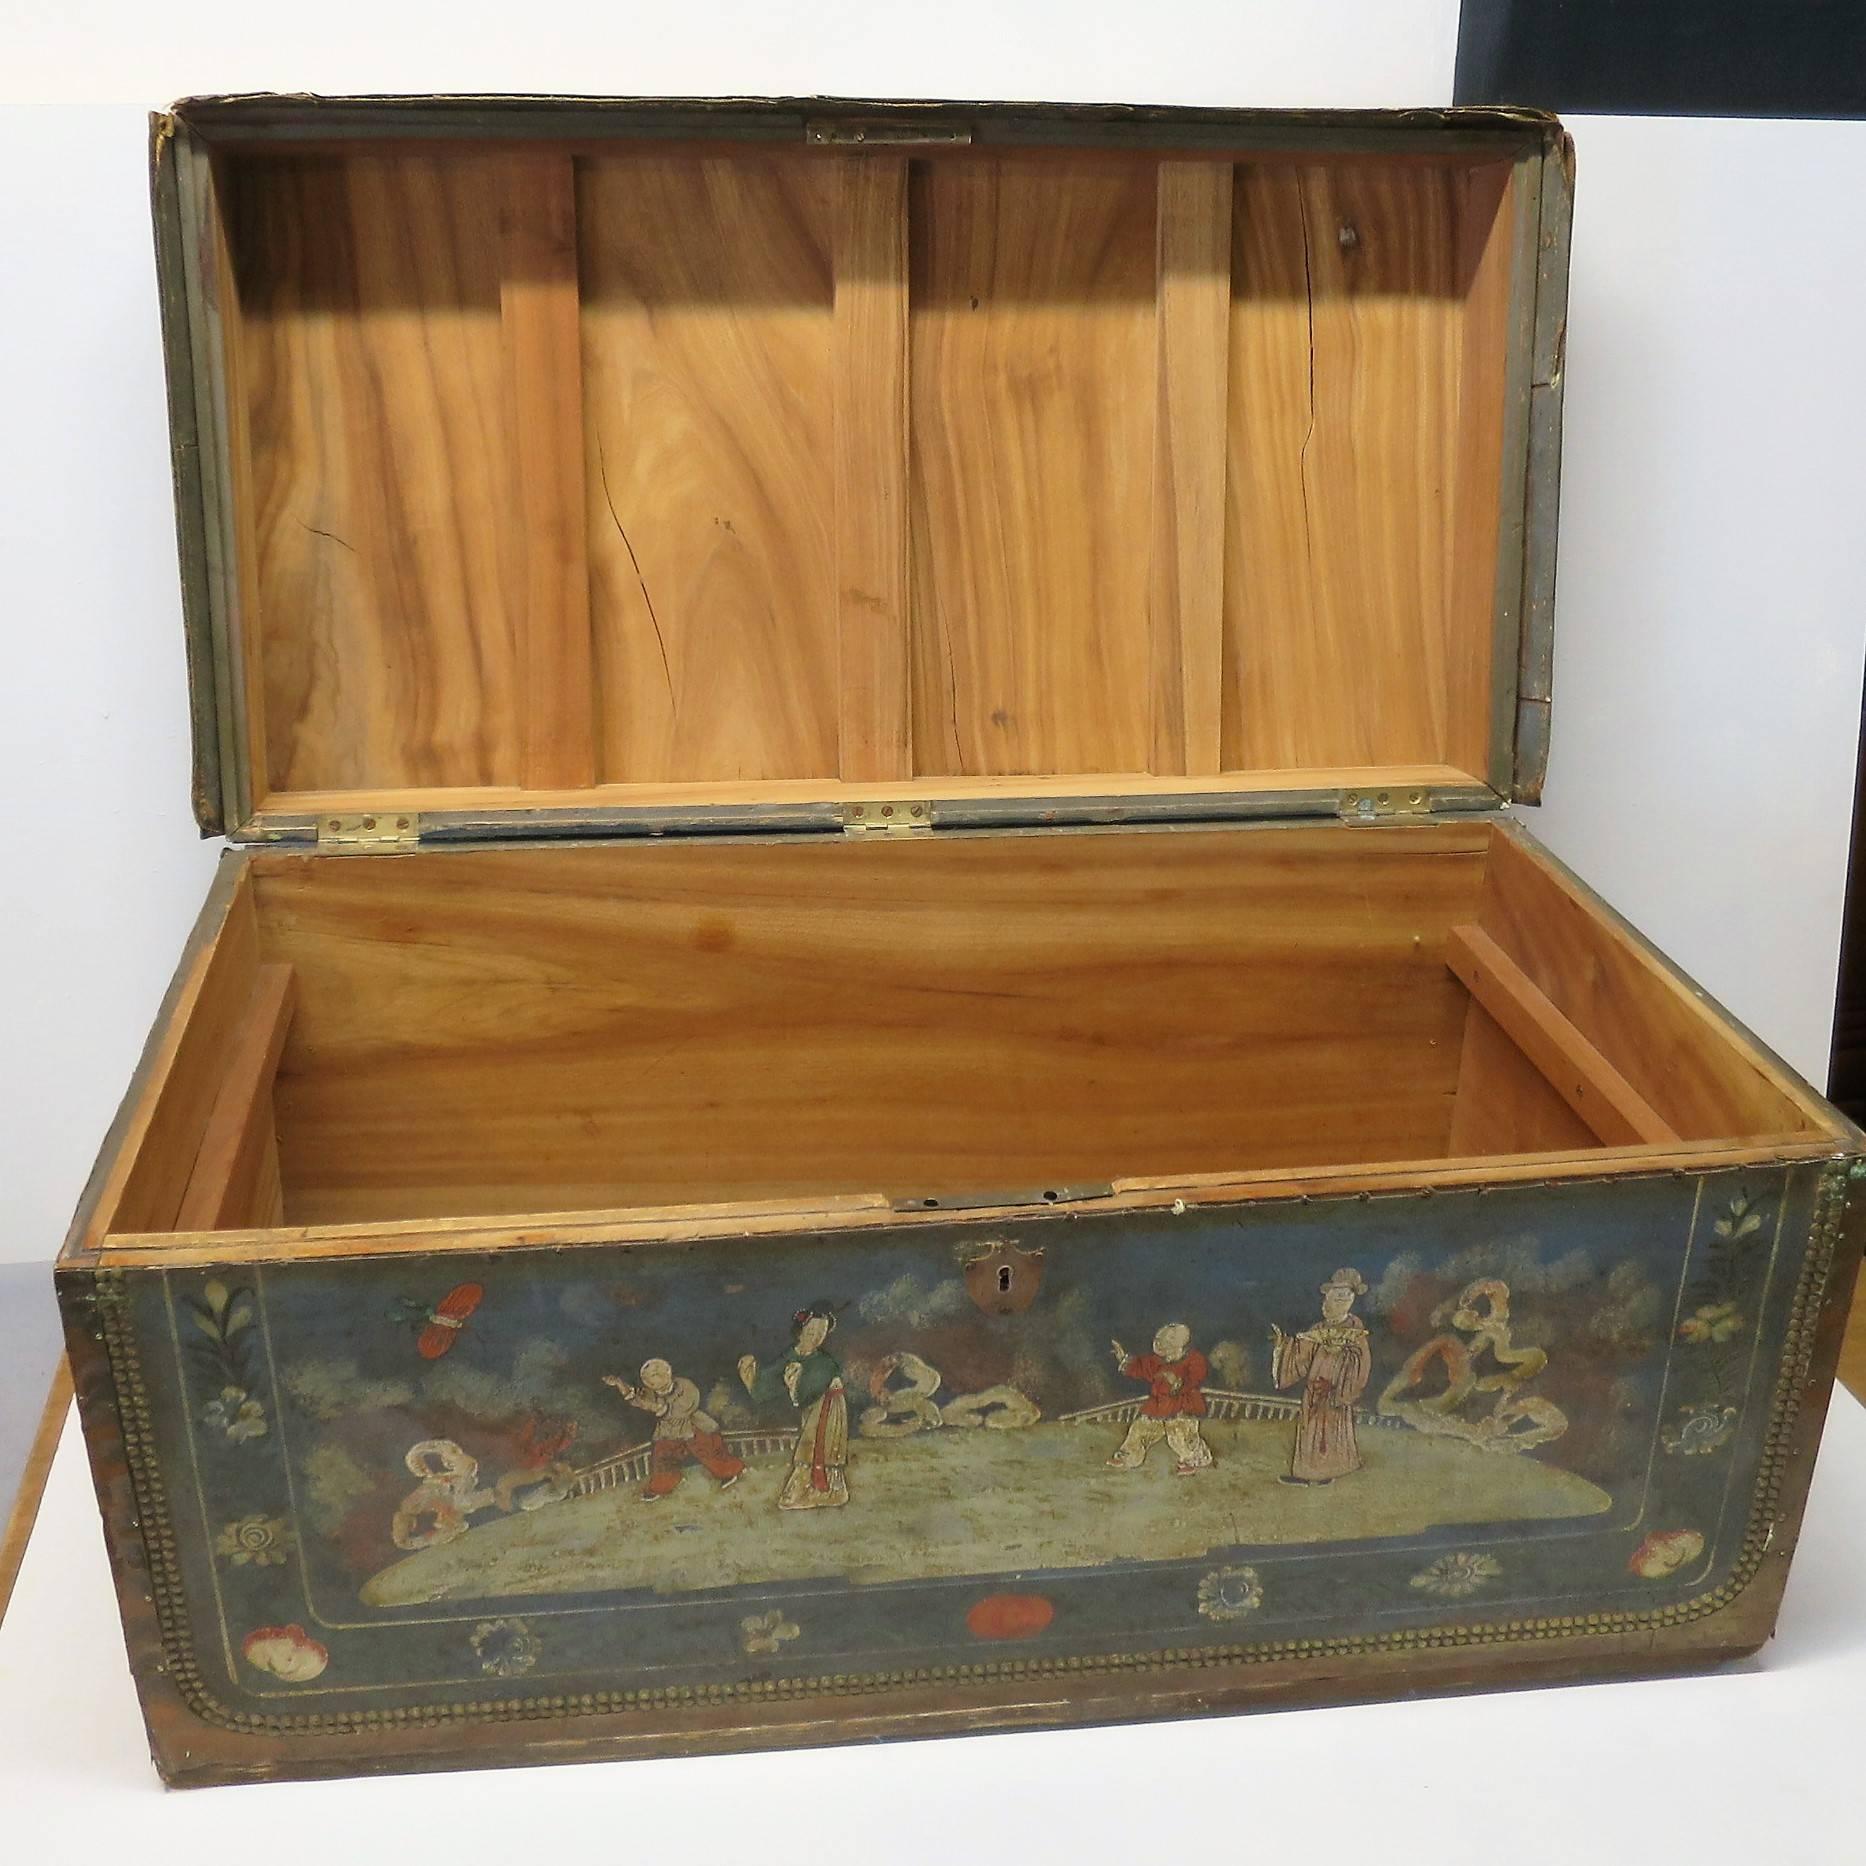 Authentic 19th century Chinese Trunk ornemented With animated scenes, figures and animals,
Hand-painted scenes all around the trunk.
    